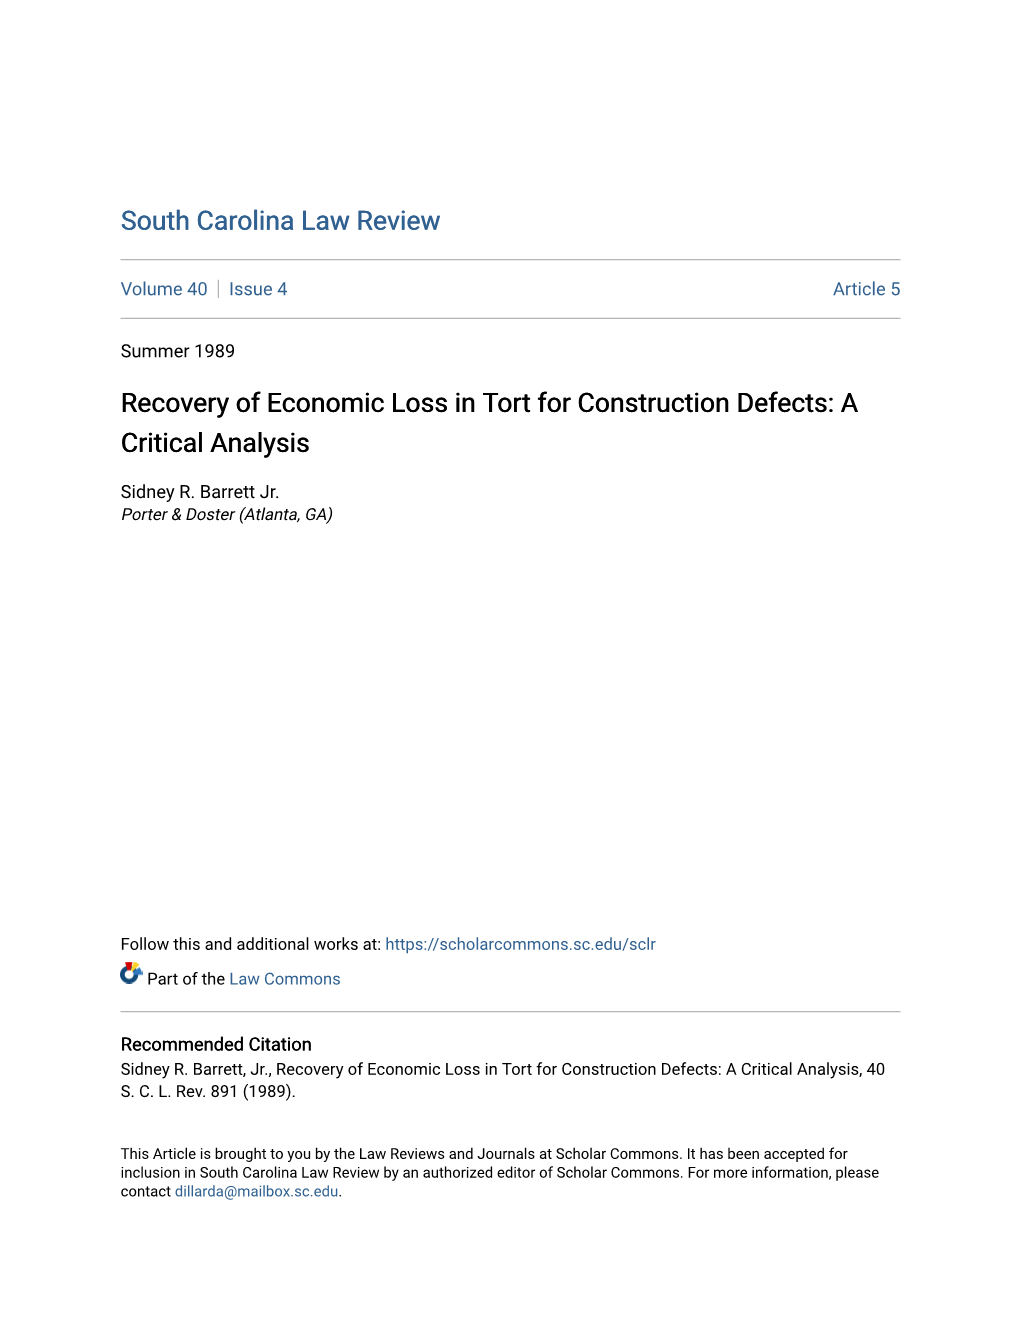 Recovery of Economic Loss in Tort for Construction Defects: a Critical Analysis